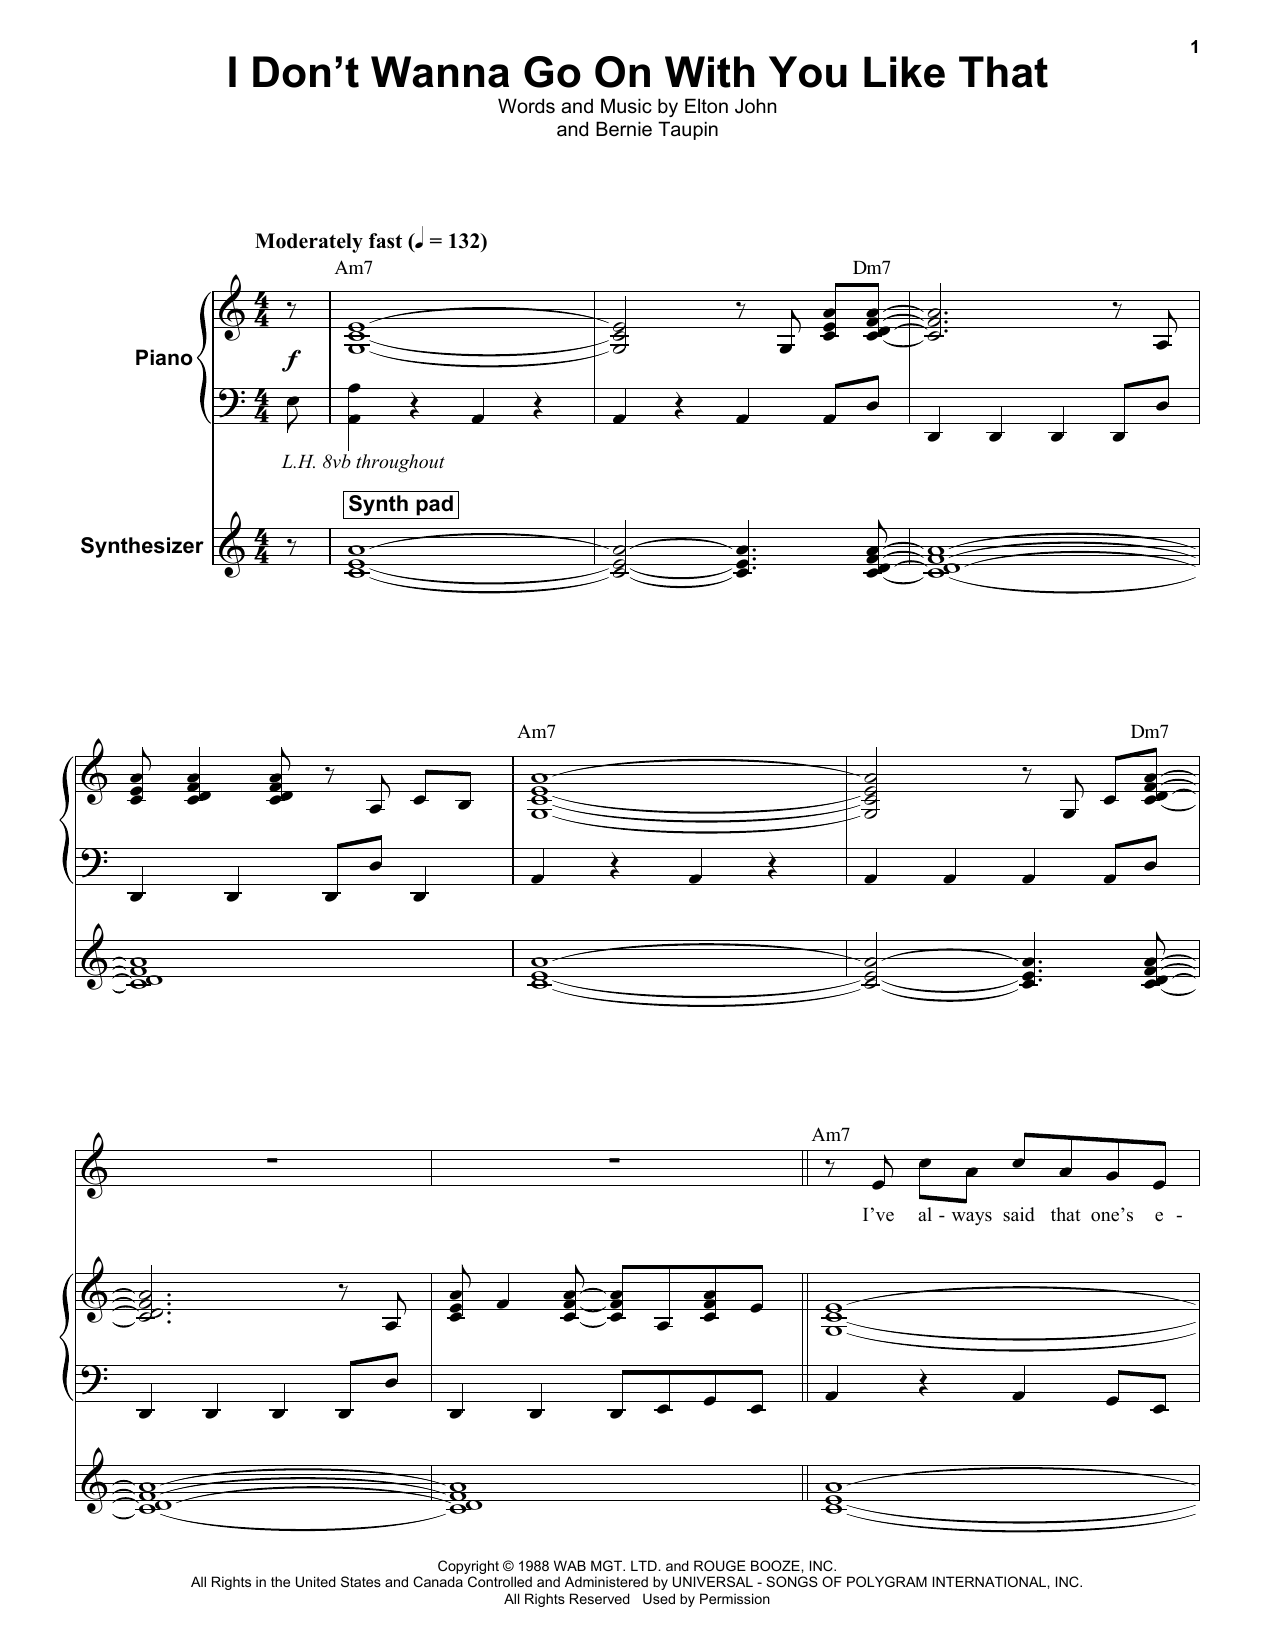 Download Elton John I Don't Wanna Go On With You Like That Sheet Music